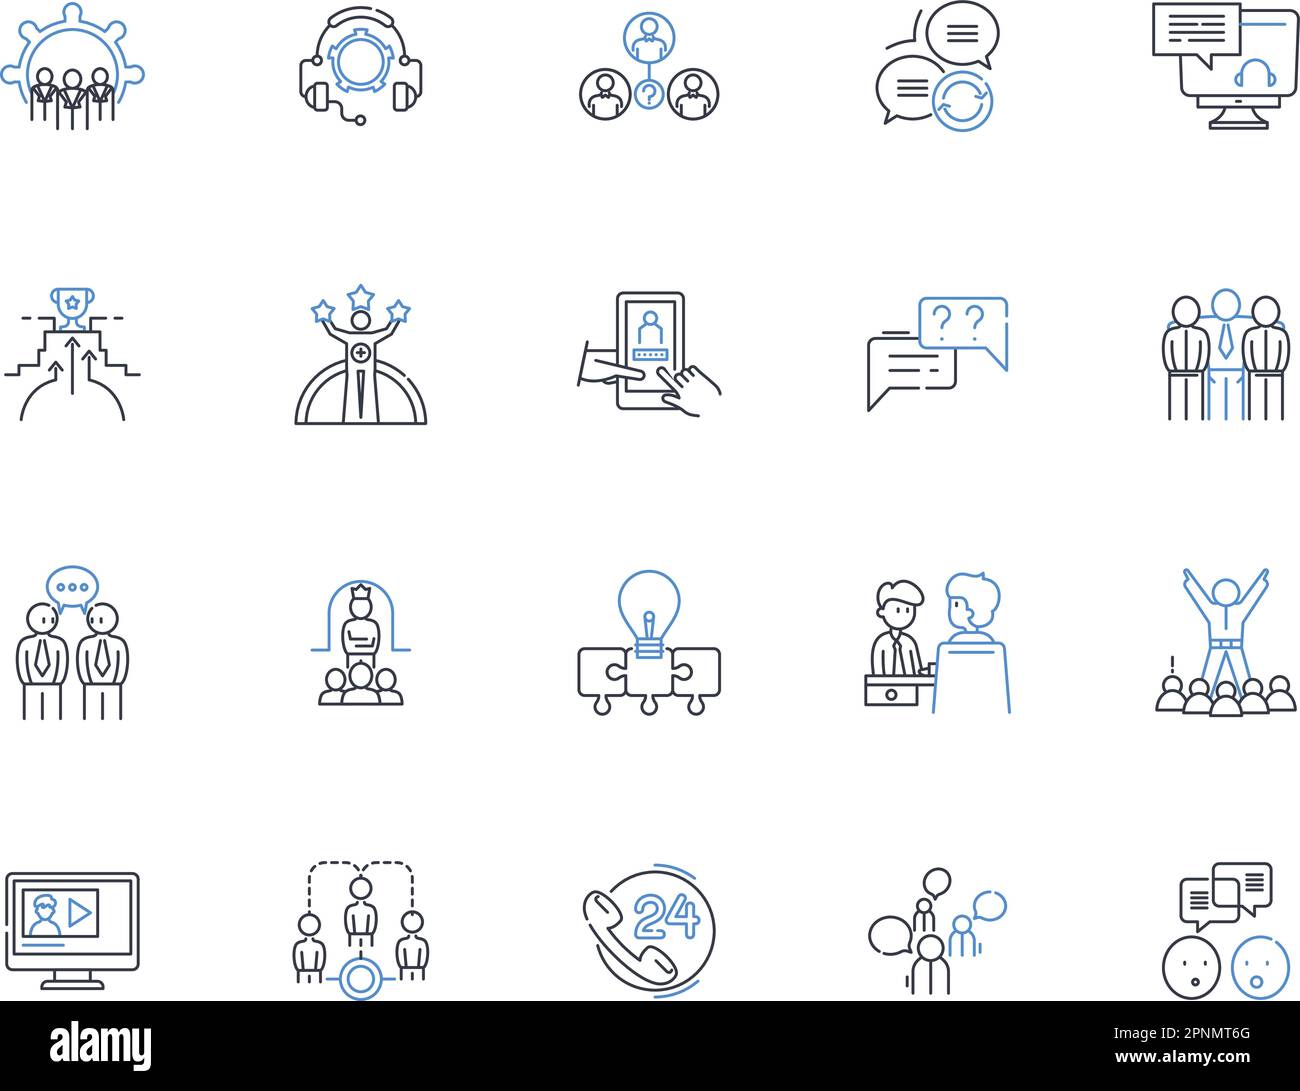 Visitor support line icons collection. assistance, guidance, help, information, advice, directions, support vector and linear illustration. map Stock Vector